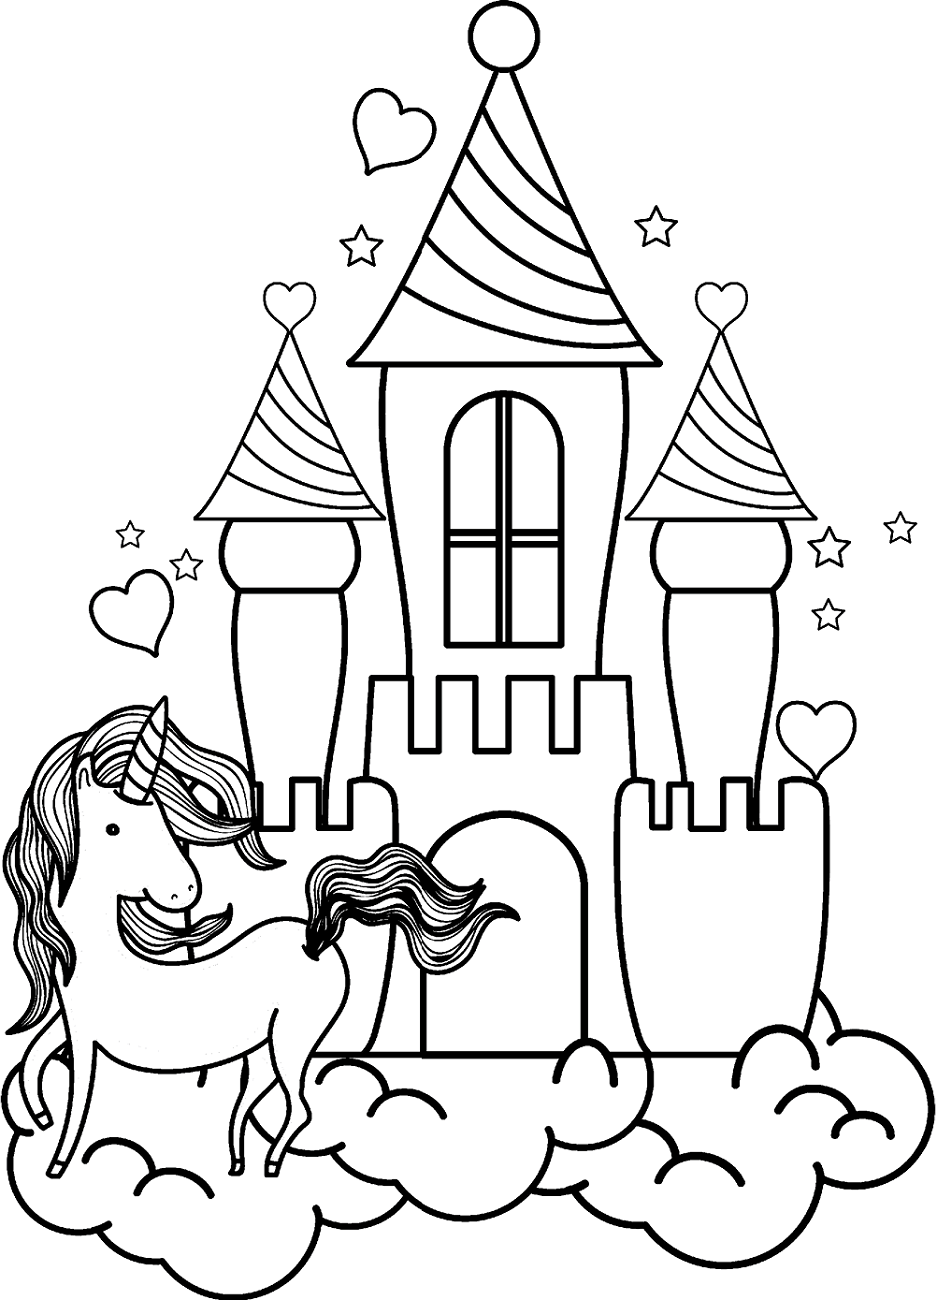 Download Unicorn And The Castle Coloring Page - Free Printable ...